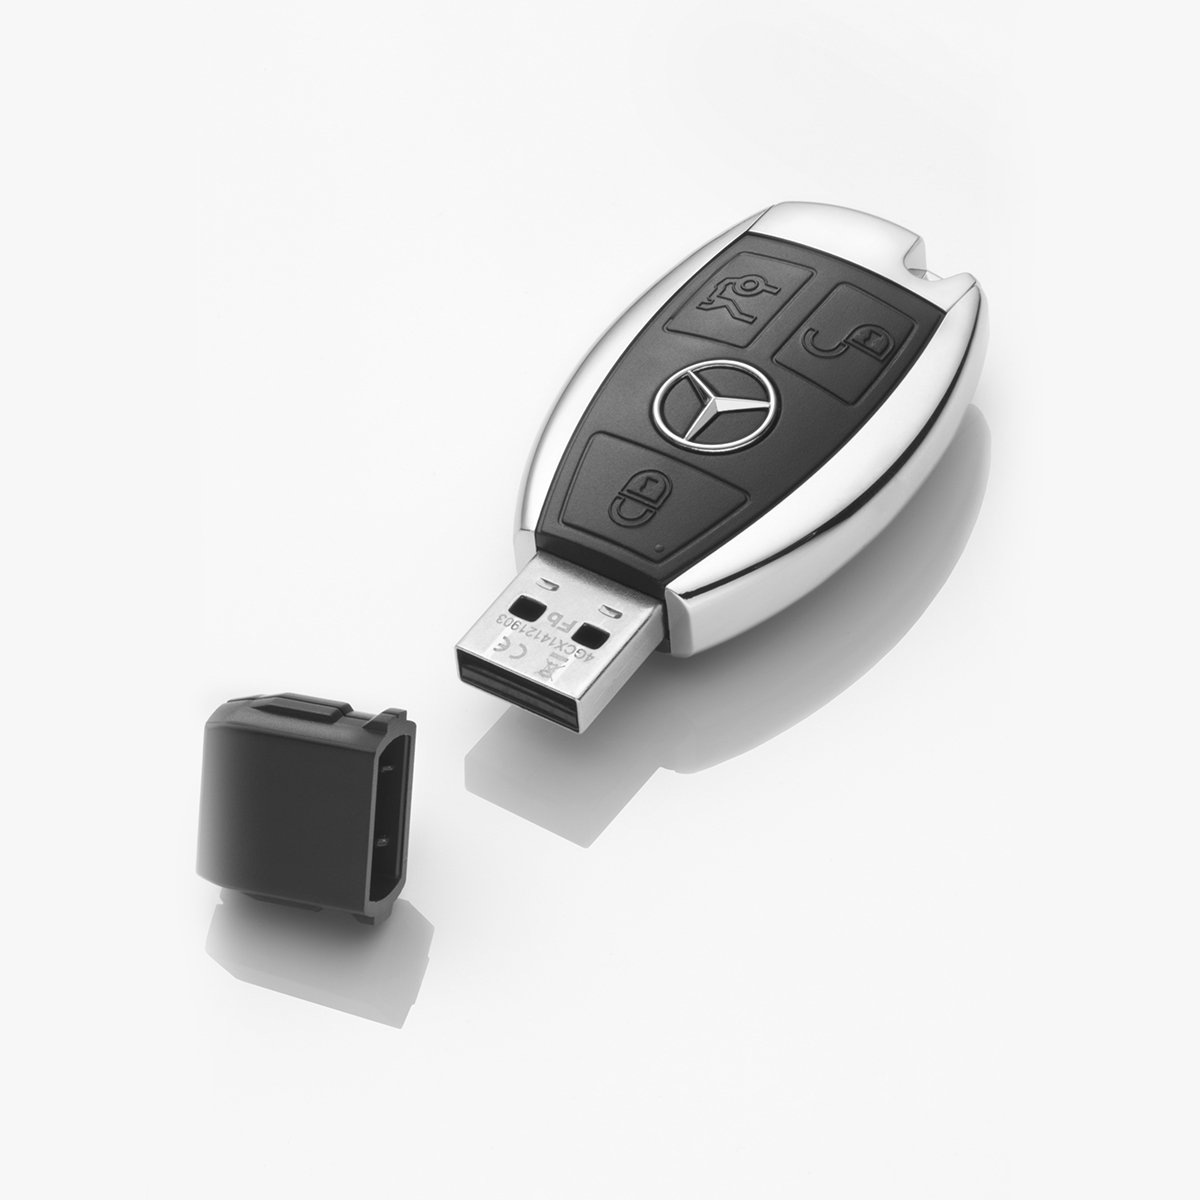 Buy Mercedes Benz USB Stick, 4GB, Pack Of 10, Key from Autohangar